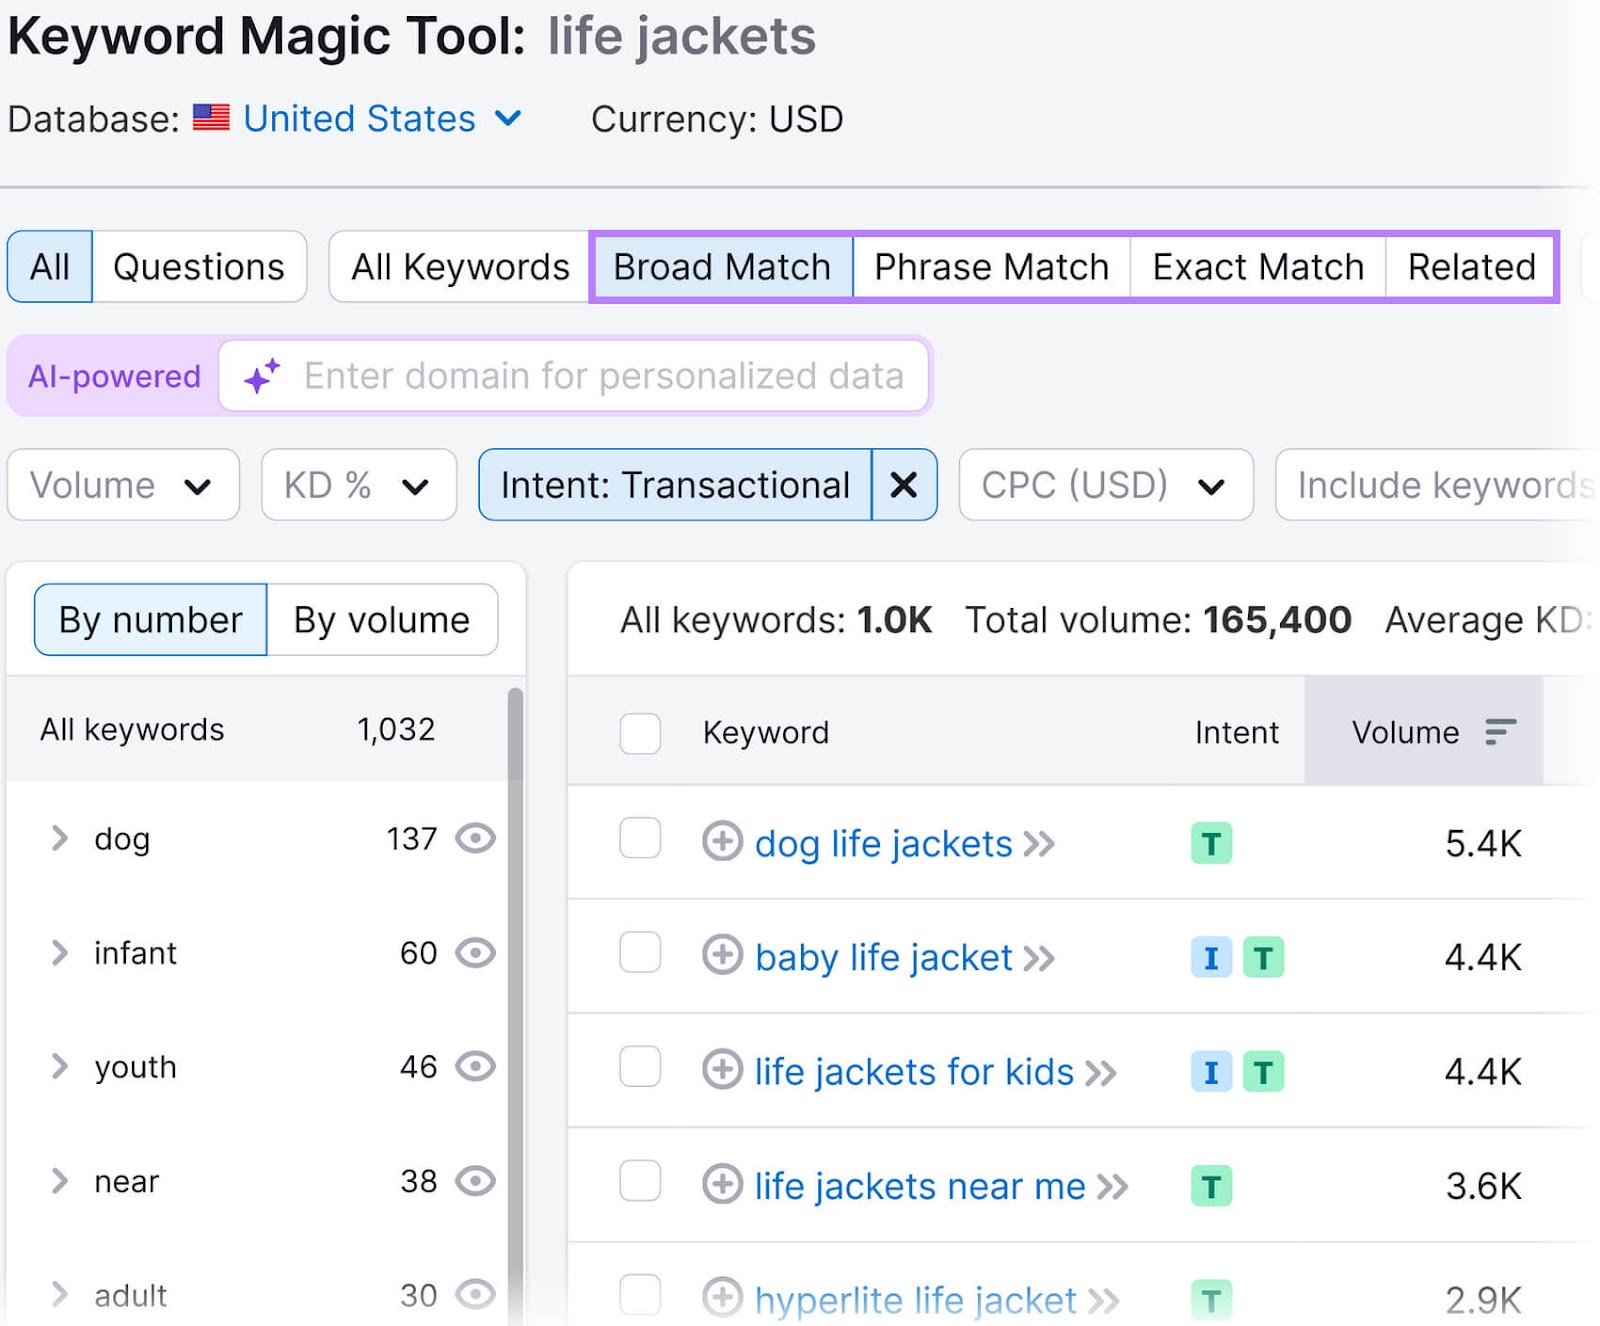 Keyword Magic Tool showing analysis for "life jackets," with tabs for different types of keyword matches in a purple box.